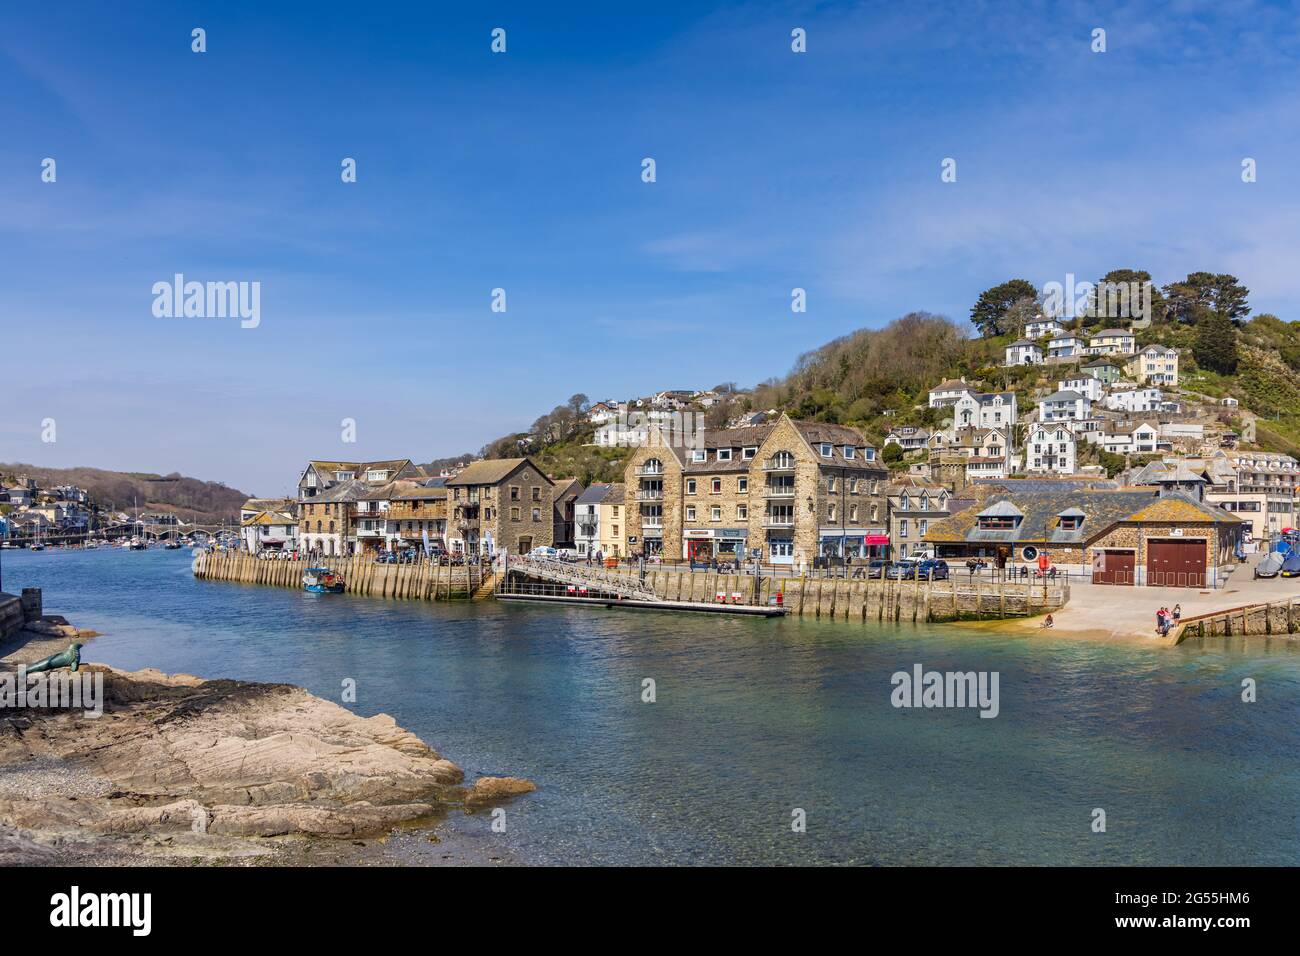 The Looe River and East Looe riverside in Cornwall. On the left is the memorial to Nelson, the one eyed seal. Stock Photo